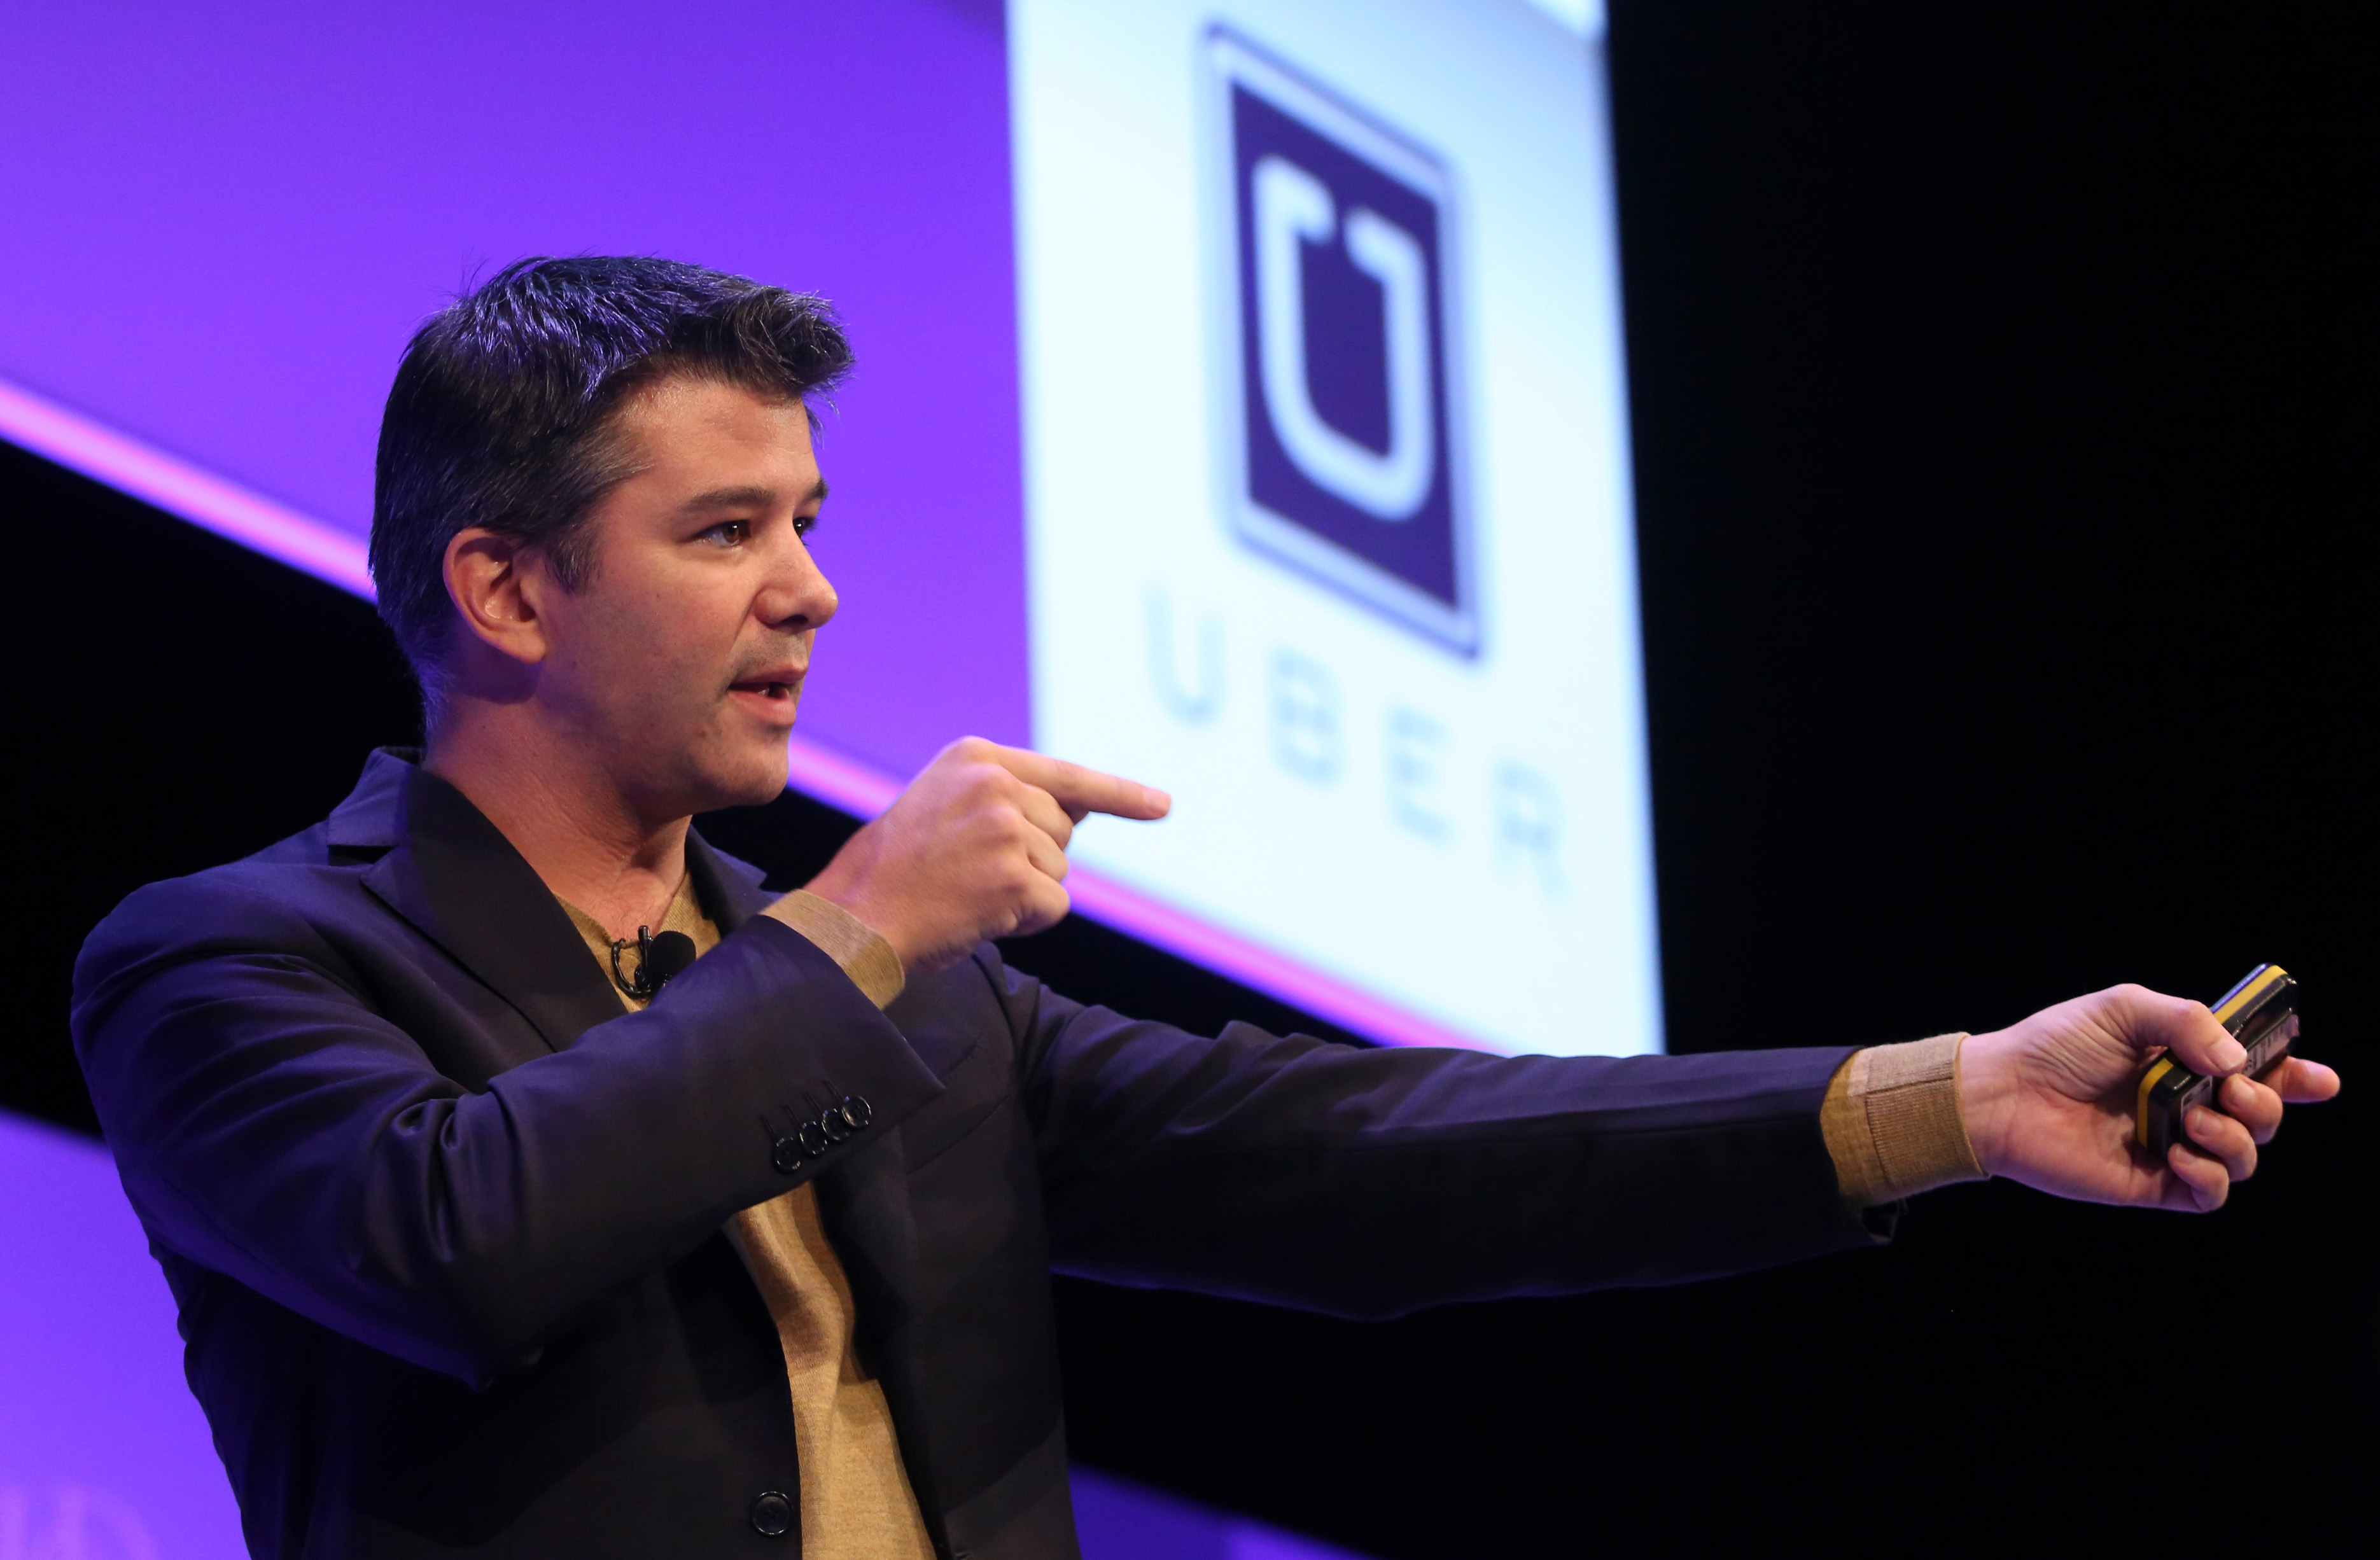 Travis Kalanick, chief executive officer of Uber Technologies Inc., gestures as he speaks during the Institute of Directors (IOD) annual convention at the Royal Albert Hall in London, U.K., on Oct. 3, 2014. (Chris Ratcliffe—Bloomberg/Getty Images)